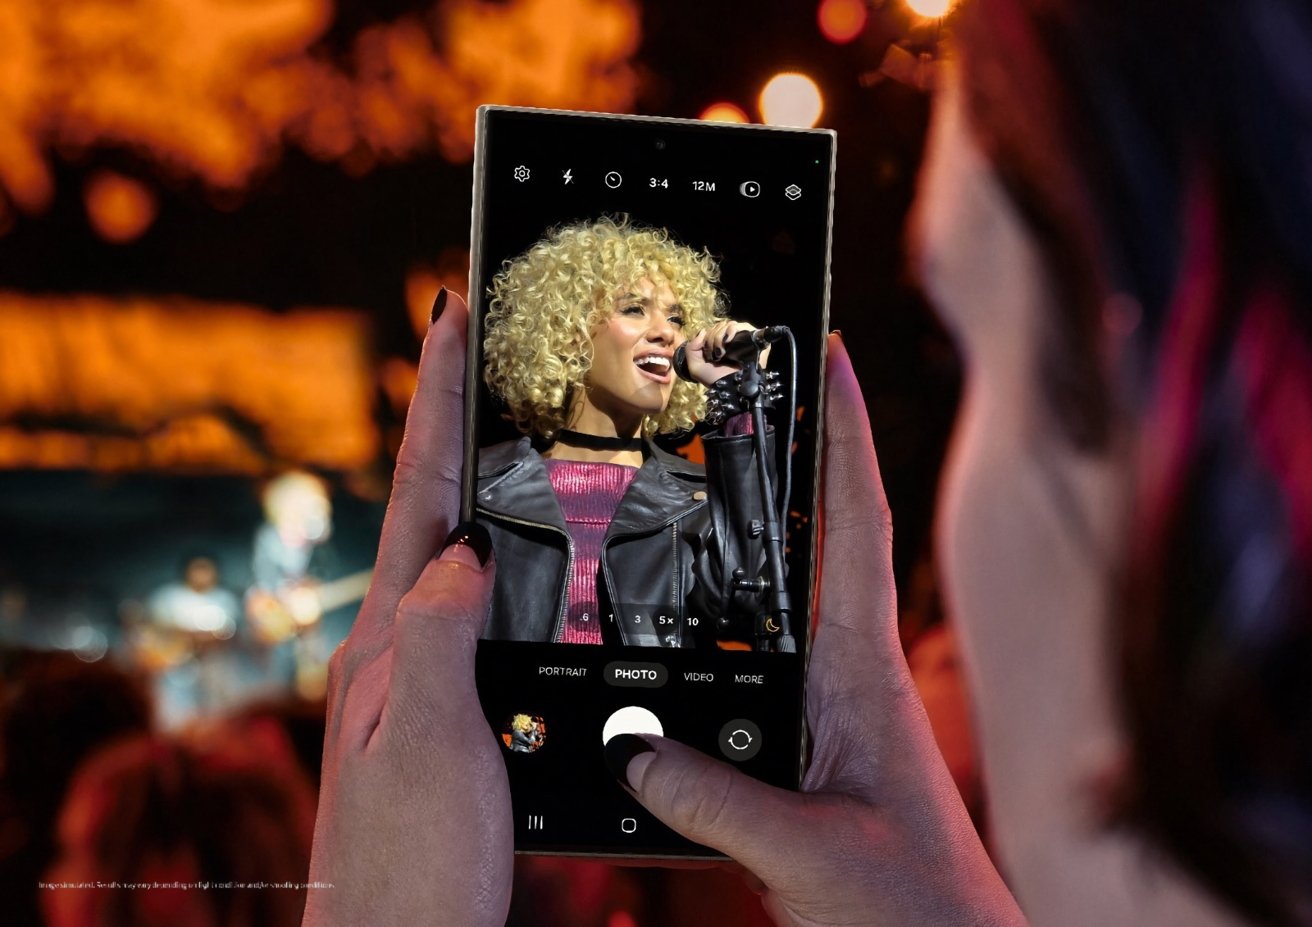 Hands holding a smartphone capturing a singer performing onstage, seen through the phone's camera screen, with a blurred audience in the background.